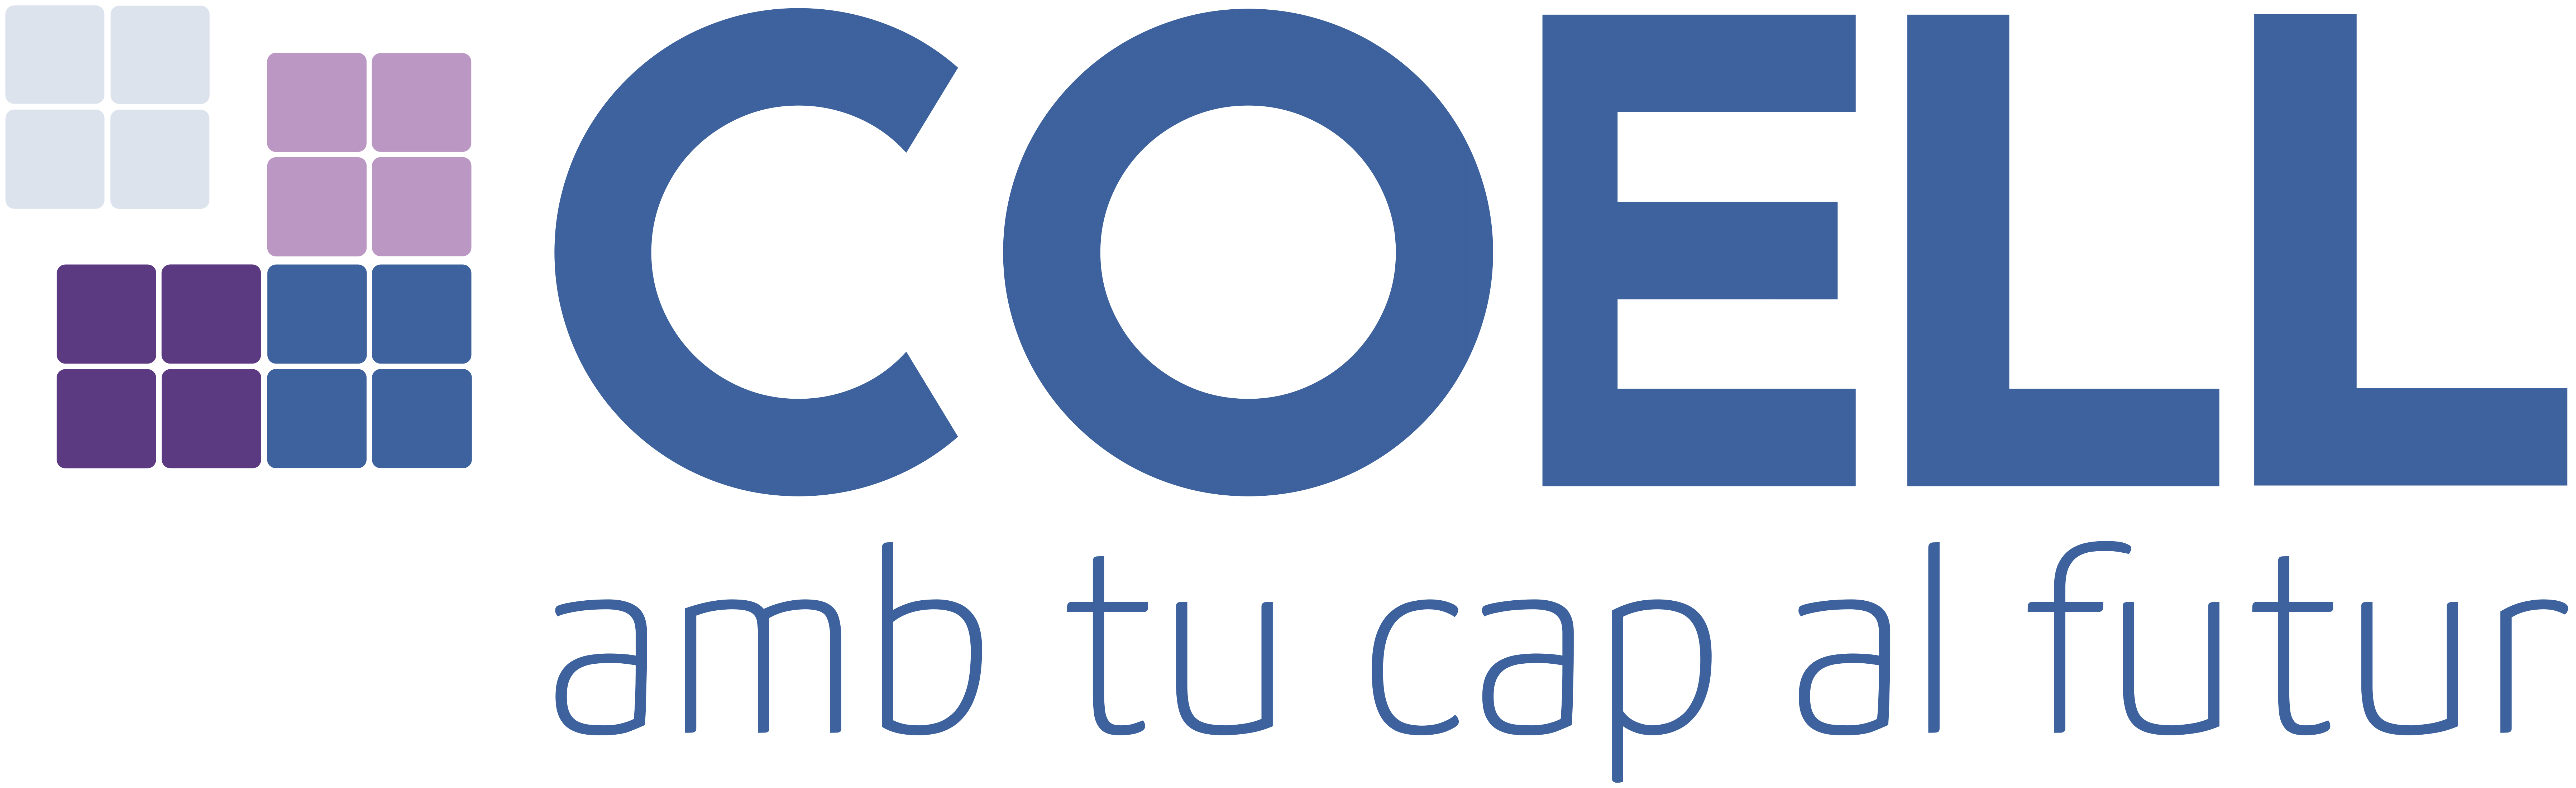 cropped-Logo-COELL-COLOR.png